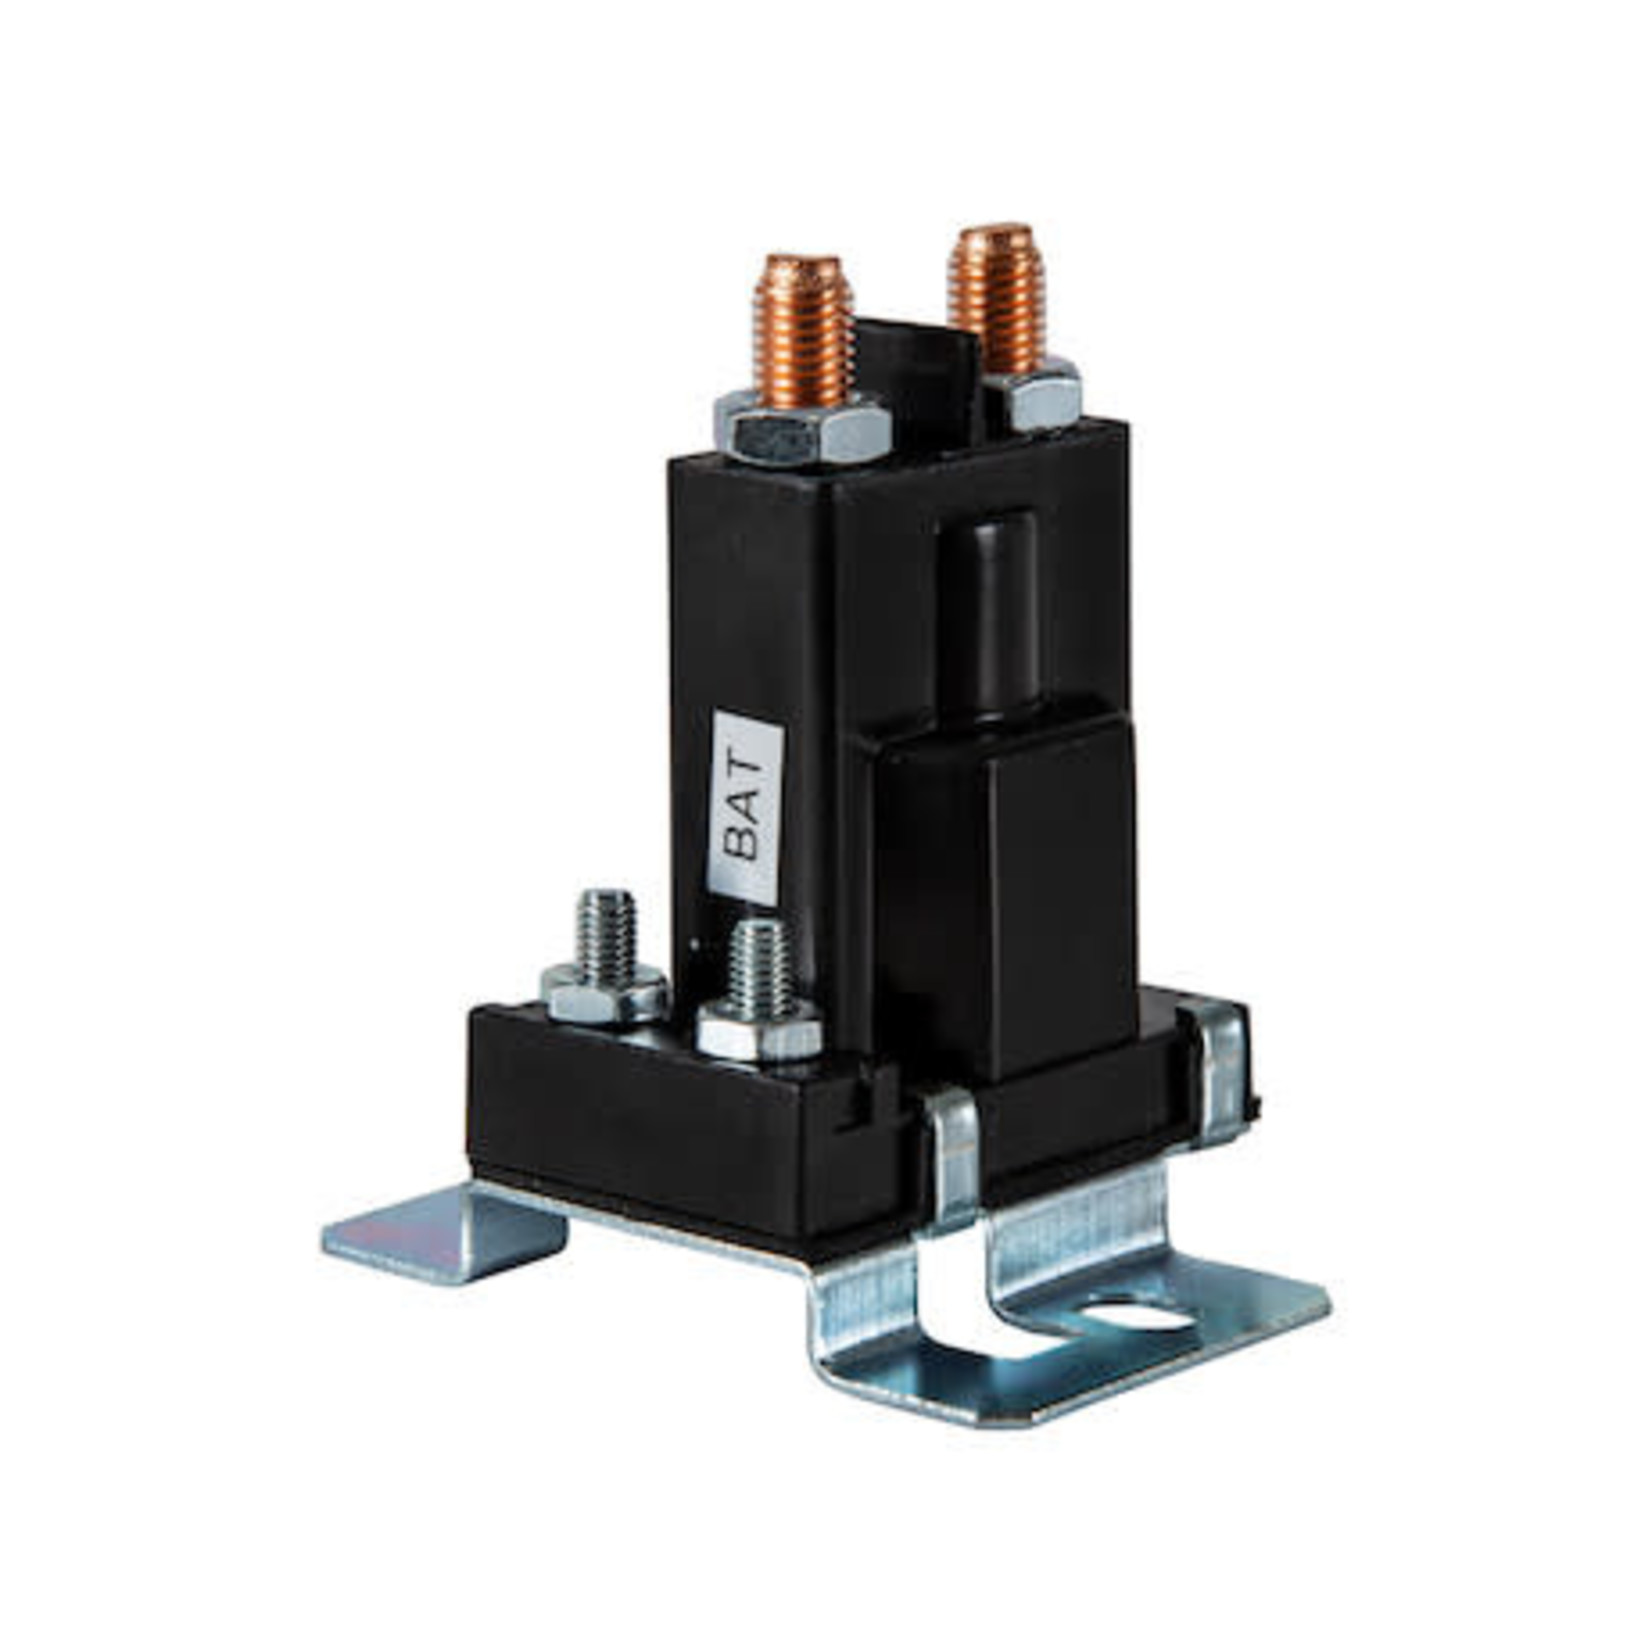 SAM SAM Relay Solenoid For Hydraulic System-Replaces Sno-Way #96002086